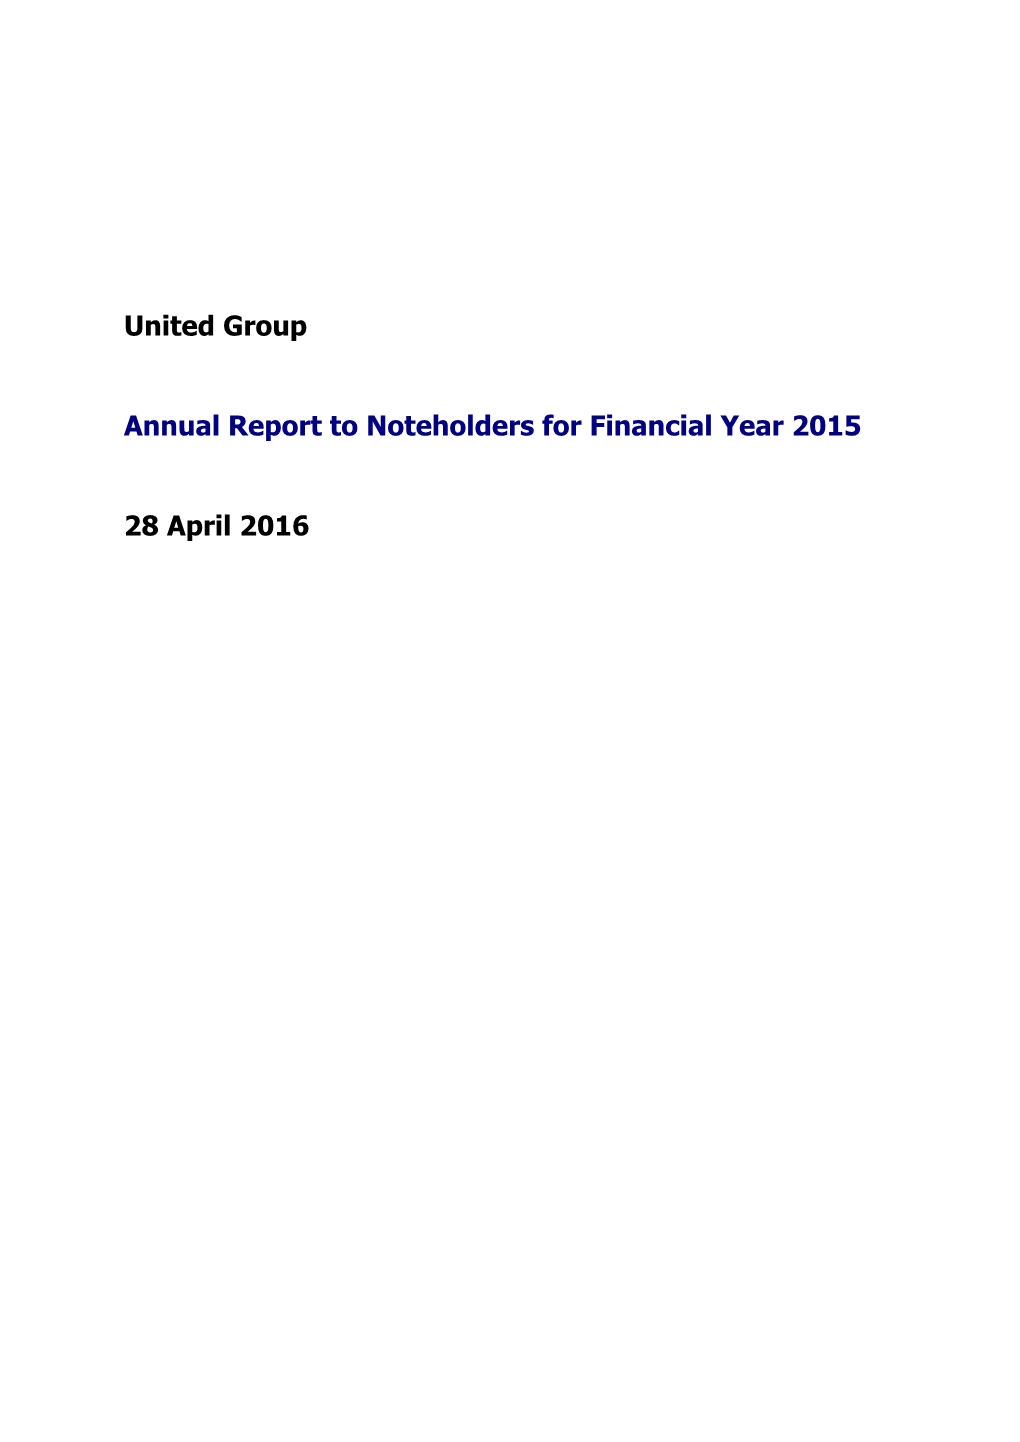 United Group Annual Report to Noteholders for Financial Year